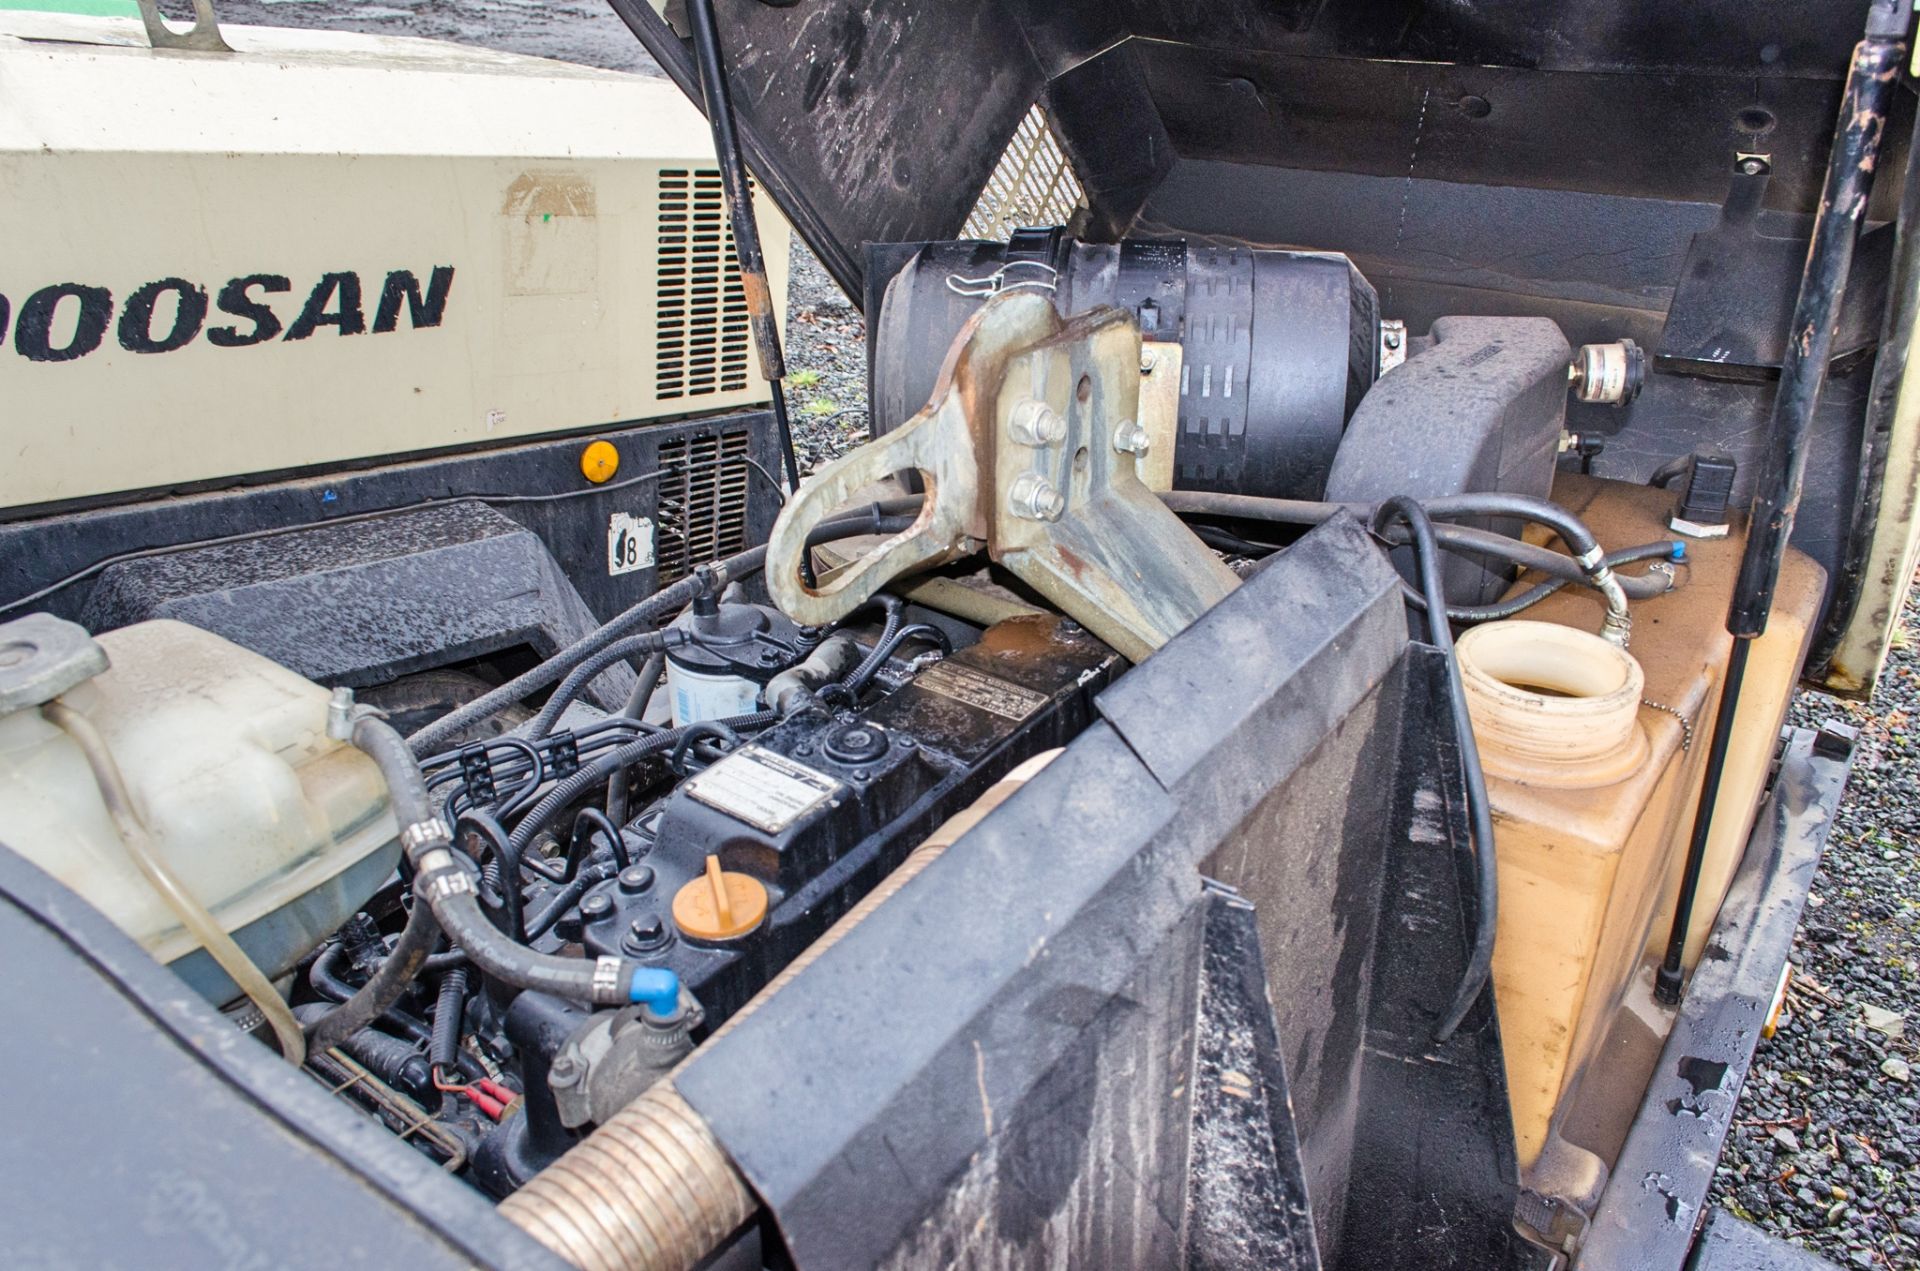 Doosan 7/41 diesel driven fast tow mobile air compressor Year: 2012 S/N: 431143 Recorded Hours: 1374 - Image 6 of 7